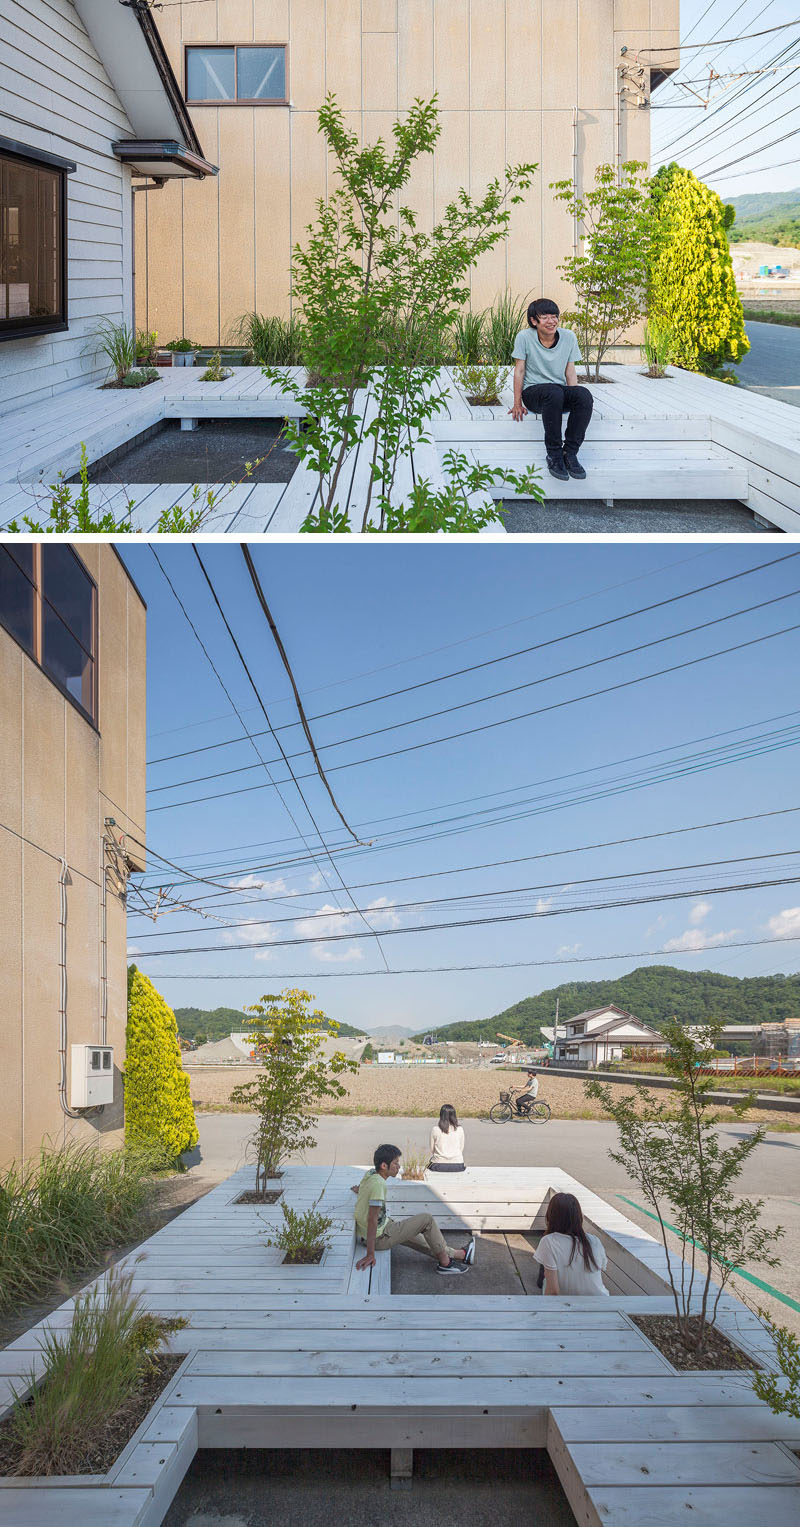 Jorge Almazán Architects + Keio University Almazán Lab have designed a public terrace with seating and plants, that acts as a barbershop waiting area. #Landscaping #Seating #Design